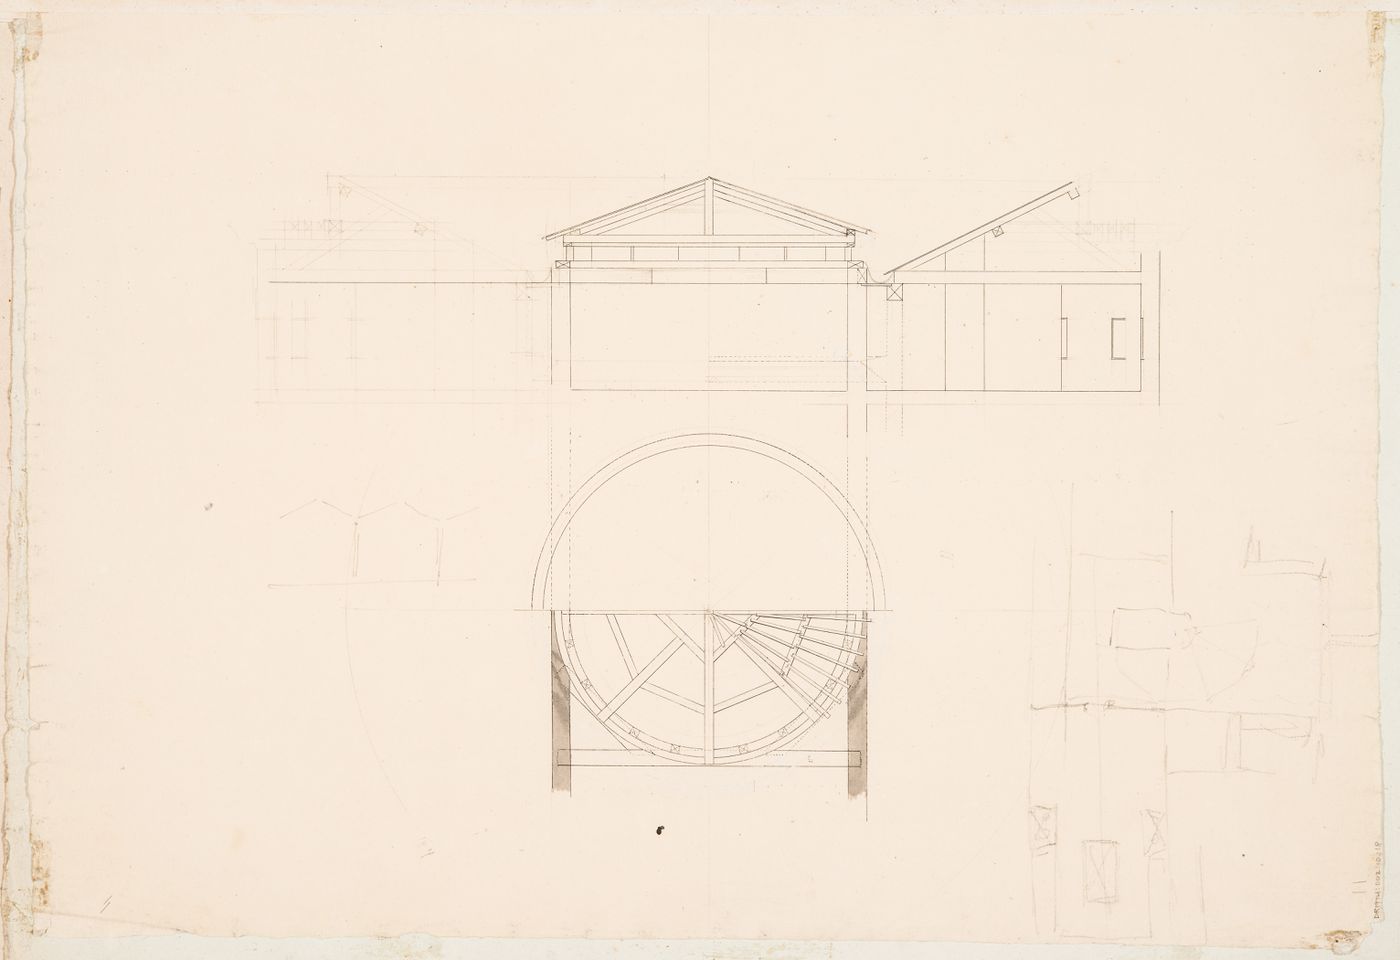 Partial plan for a theatre; verso: Section and partial roof plan for an unidentified building